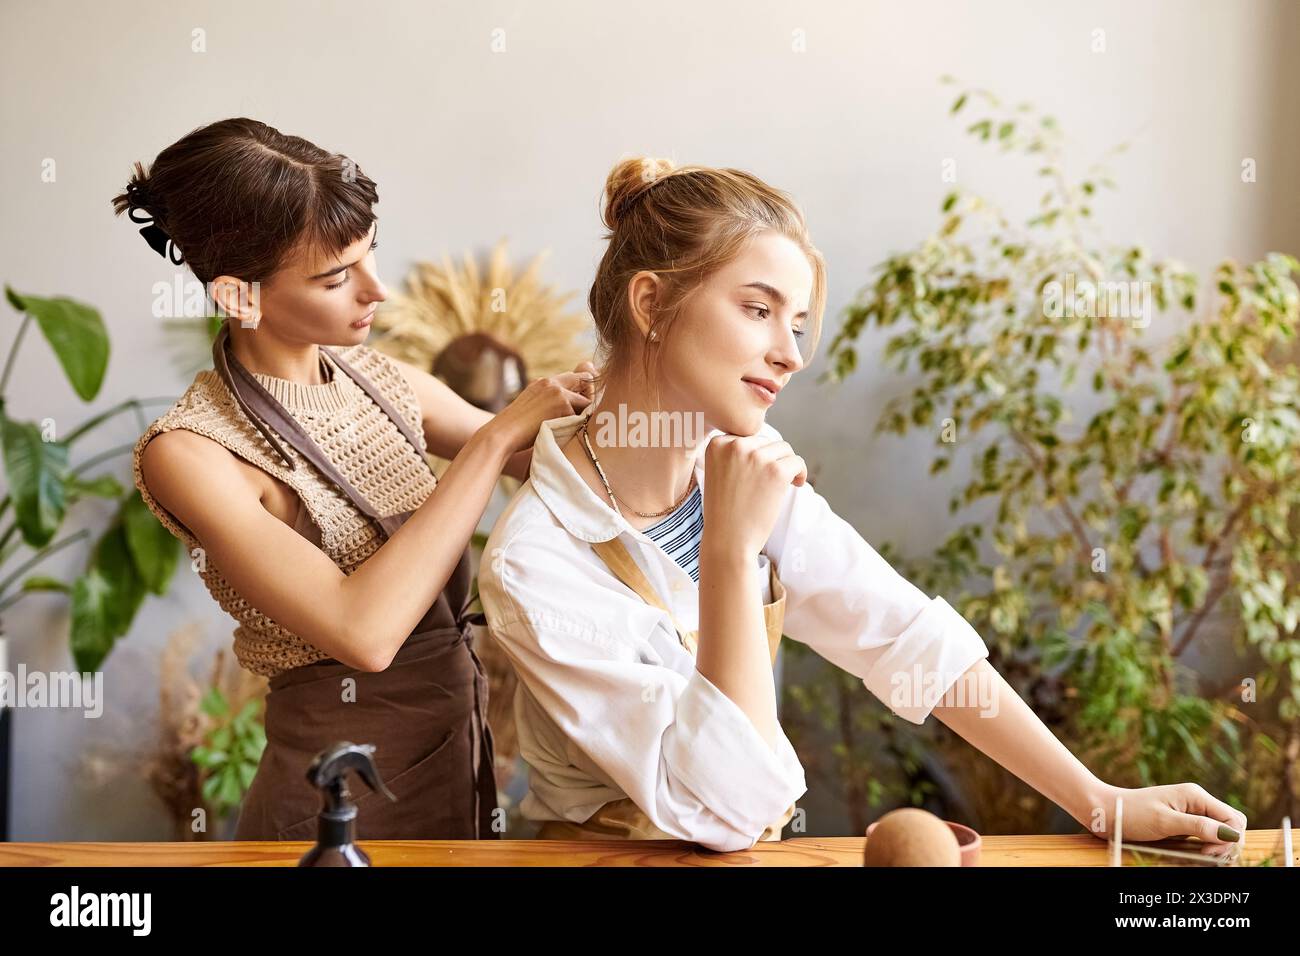 Two women standing at a table with a plant, displaying a nurturing and artistic connection. Stock Photo